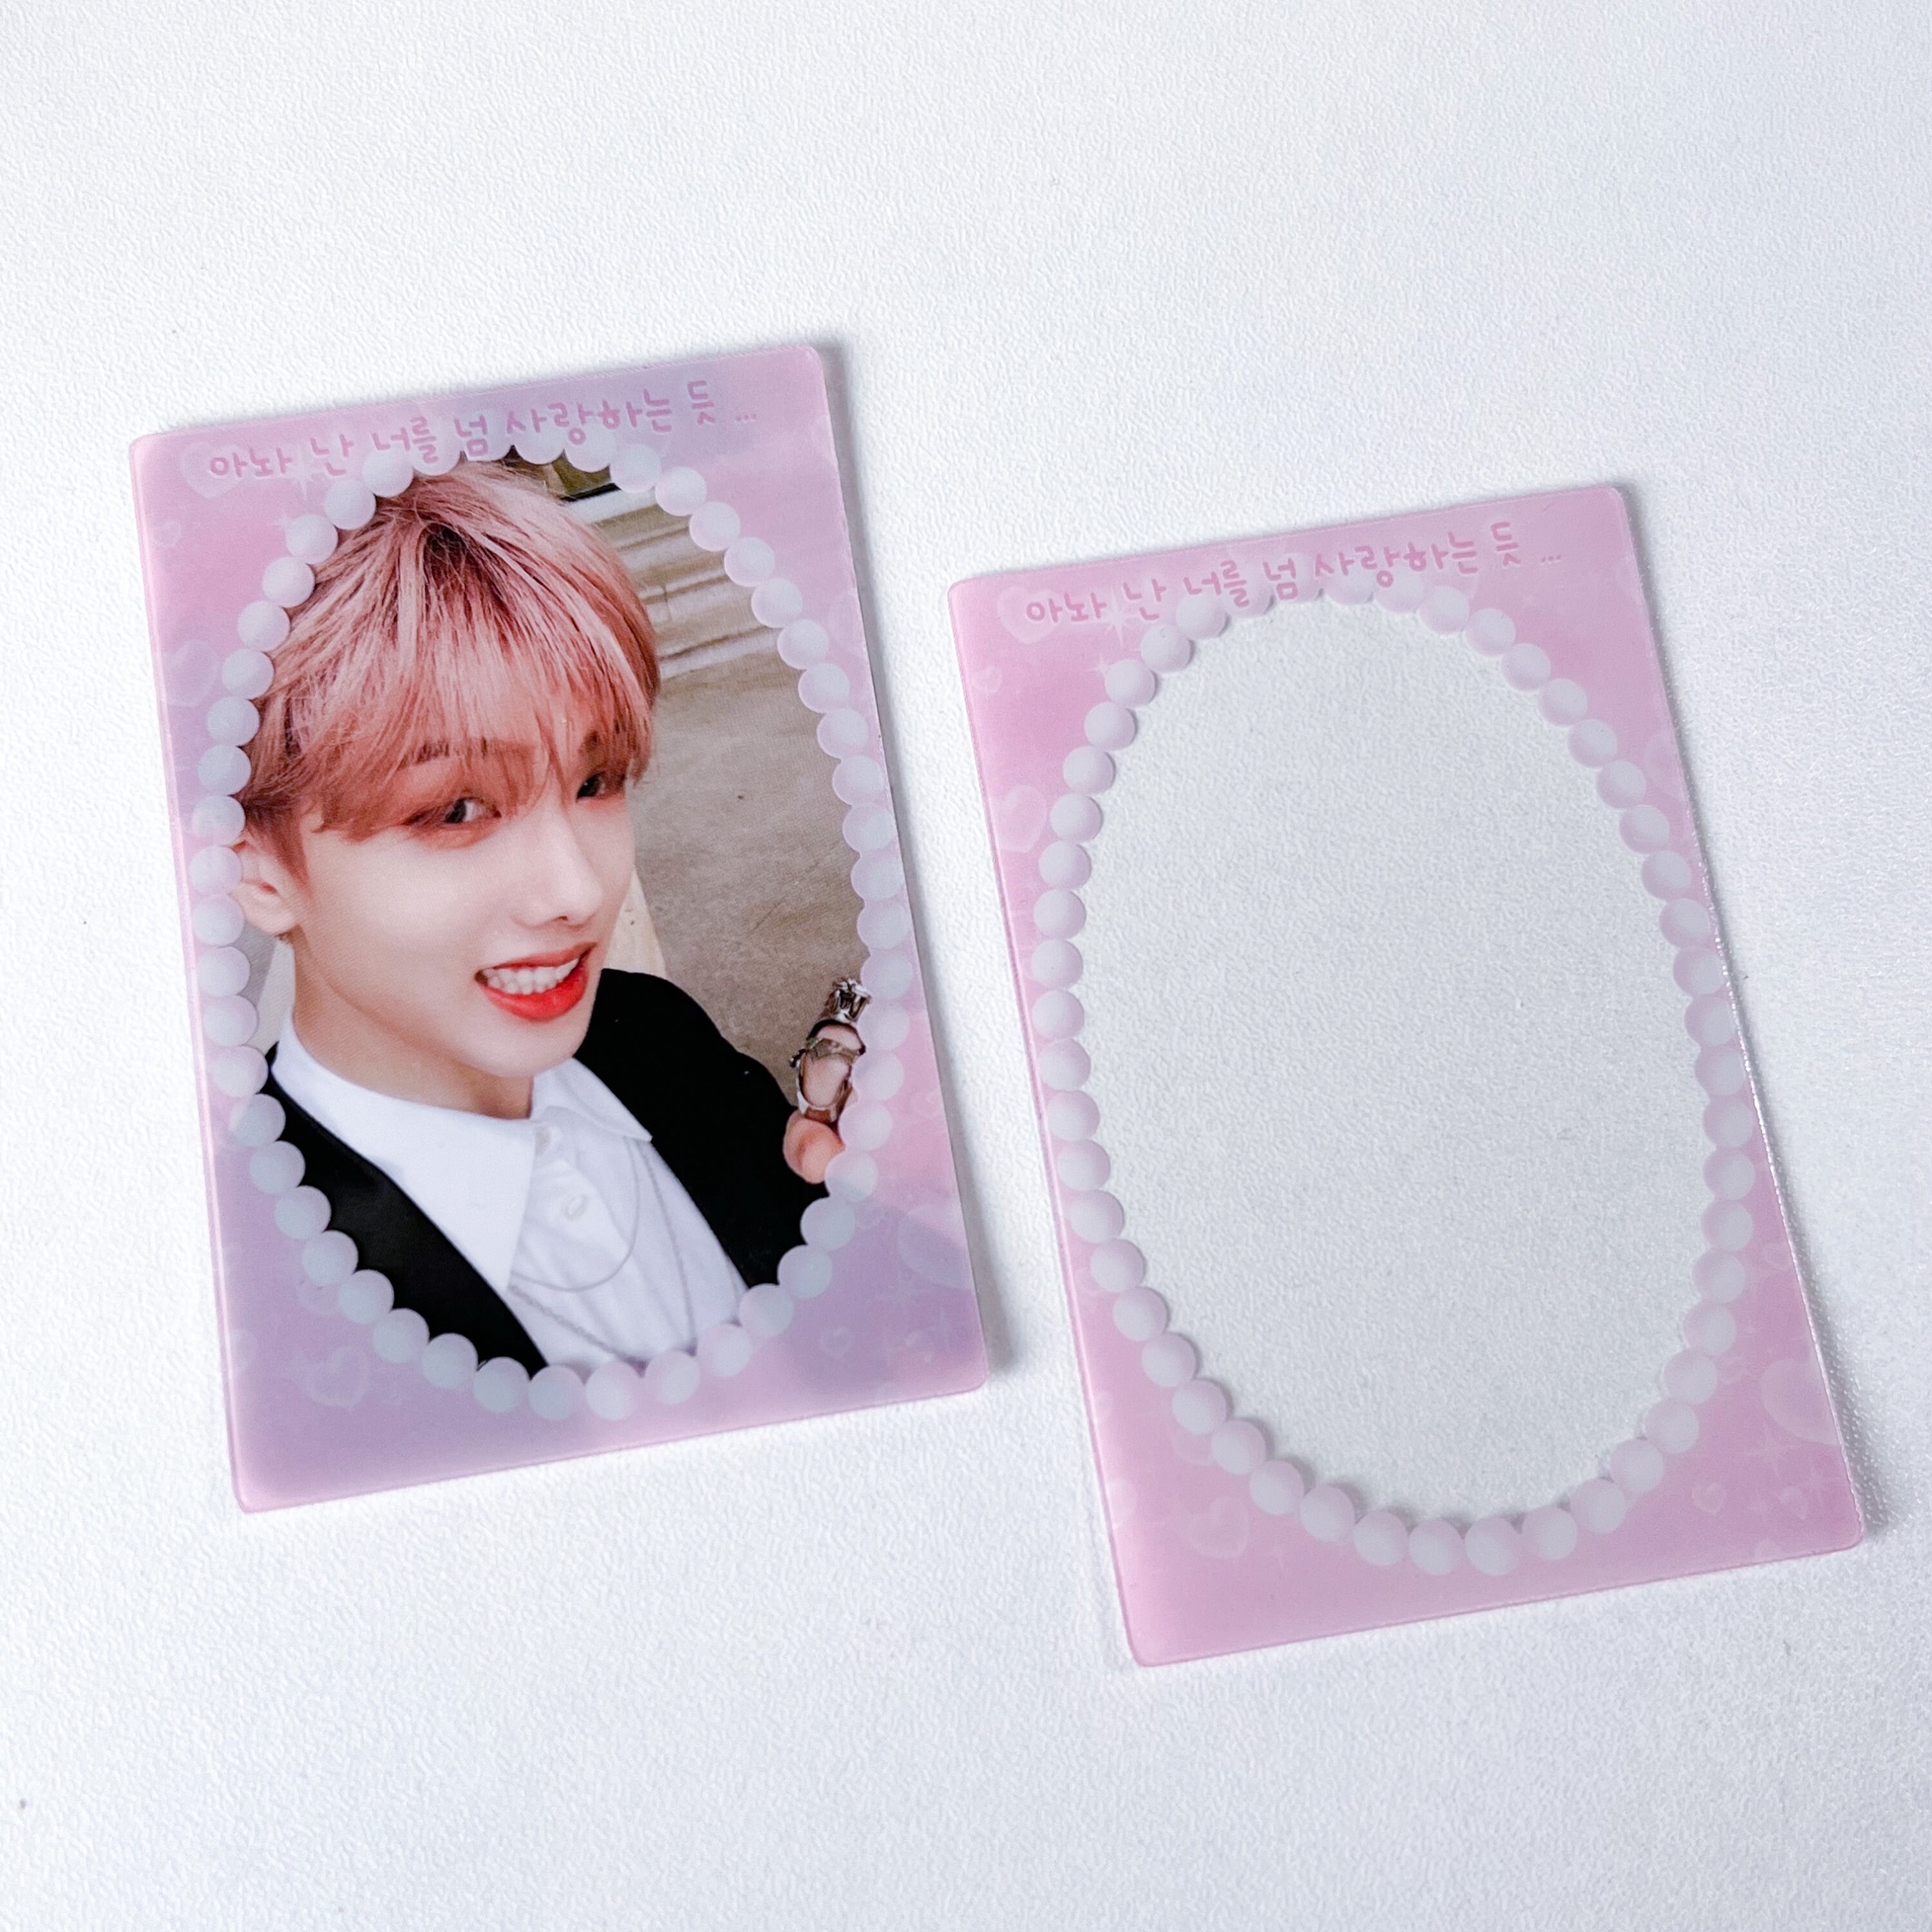 60 Sheets Korean Stickers Kpop Deco Stickers for Photocard Self